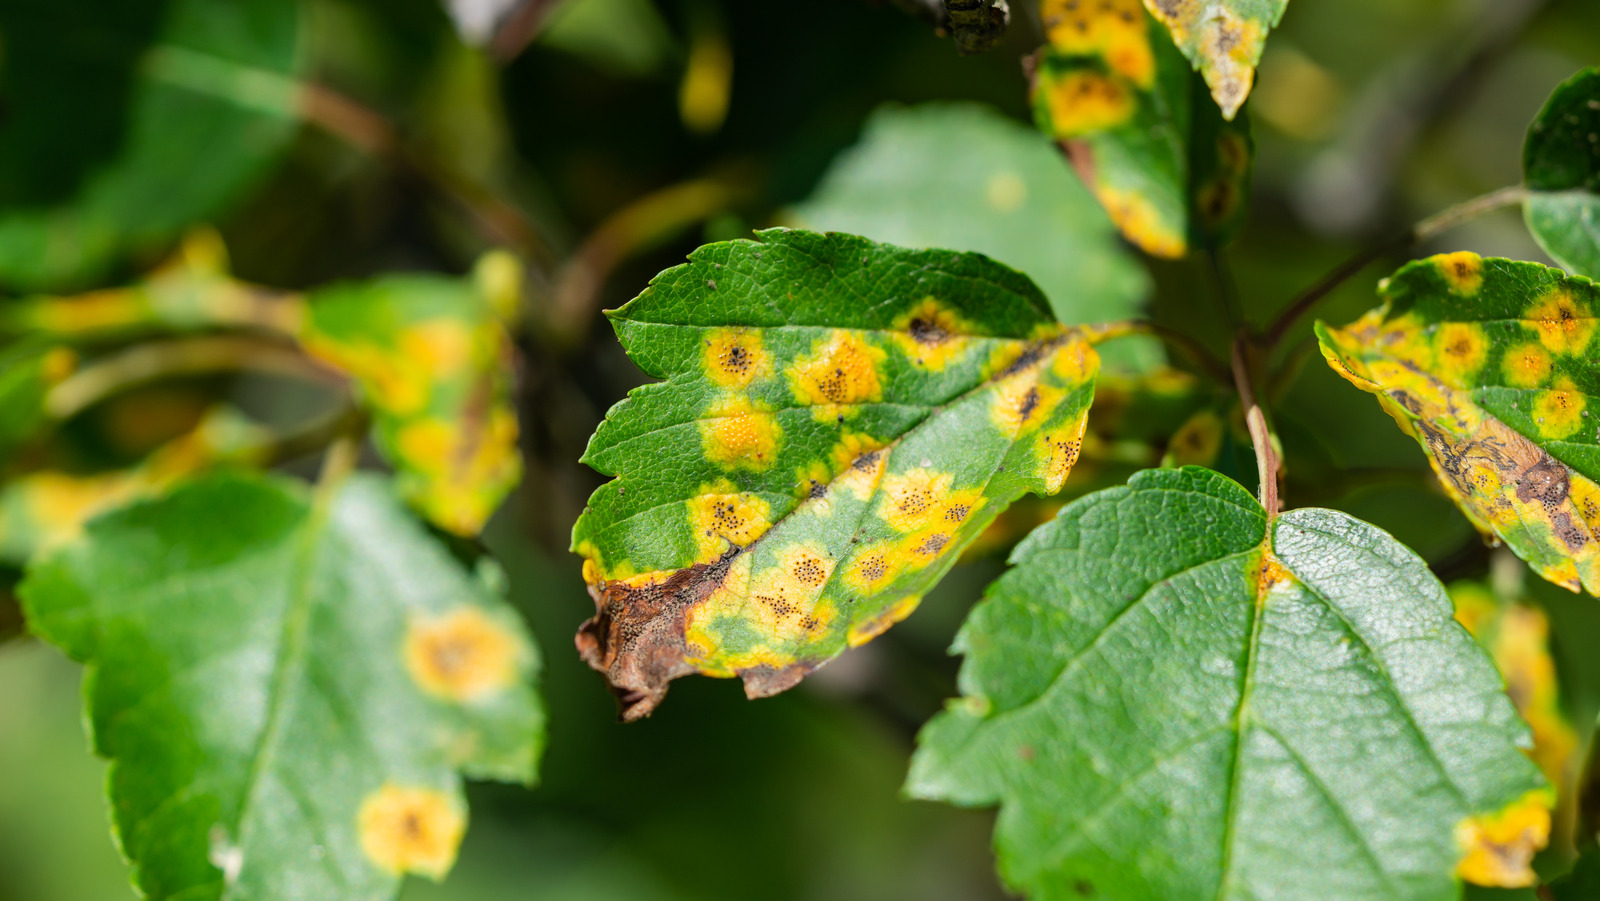 What It Means If You See Rusty Orange Spots On Tree Leaves In Your Yard